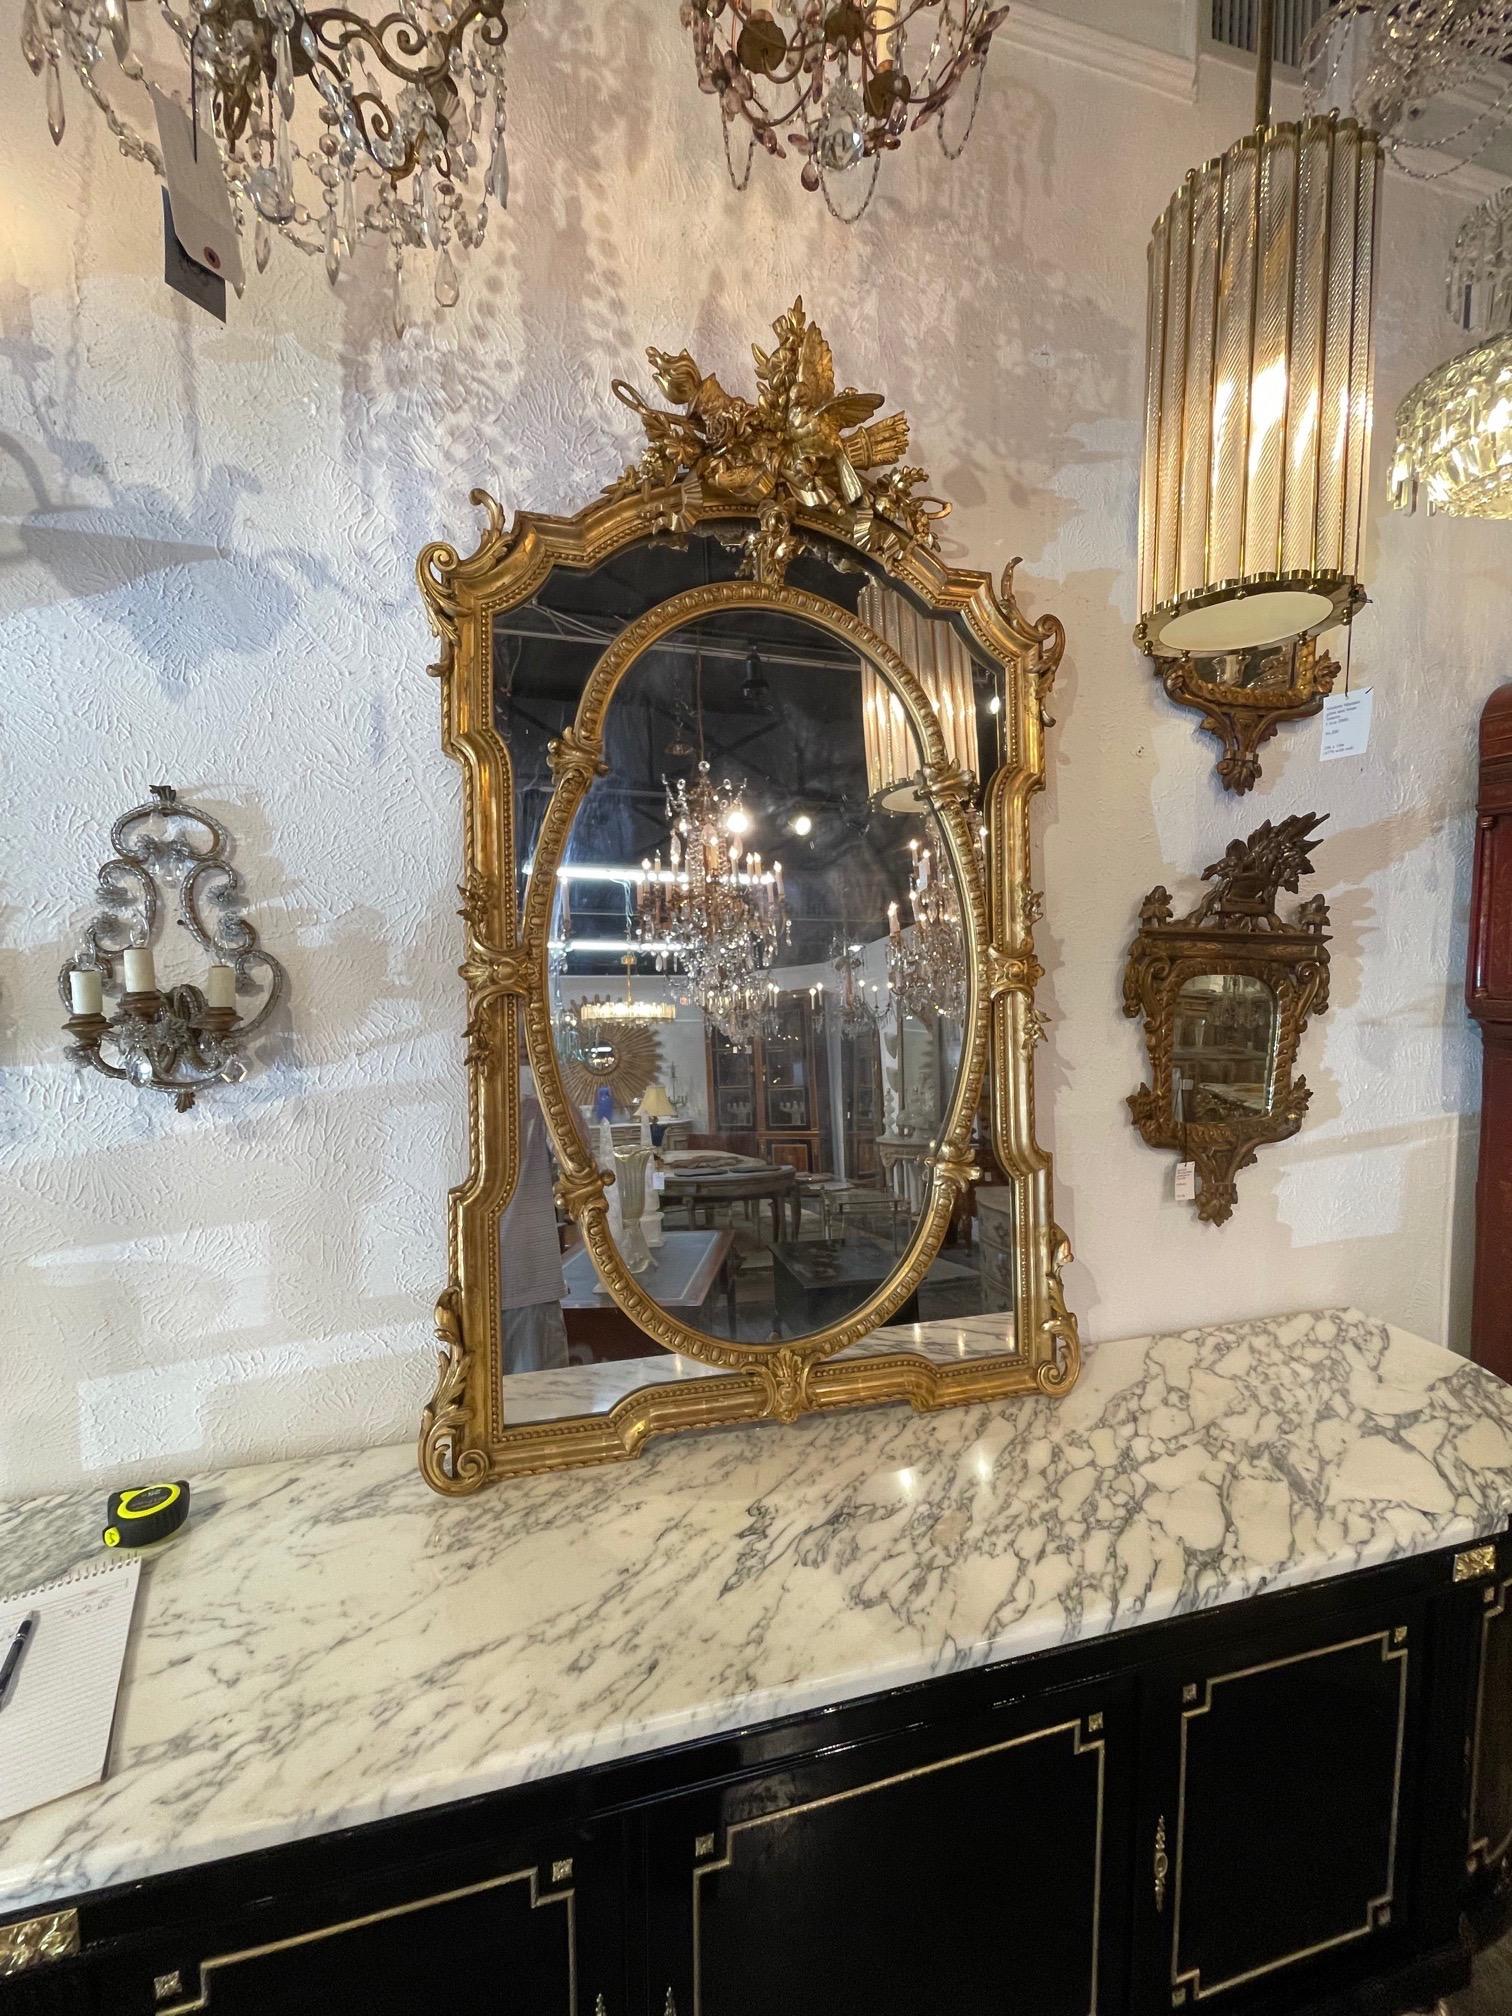 Exquisite 19th century French Louis XVI carved and giltwood mirror. Amazing carvings including floral images, ribbons and birds. A real work of art!!